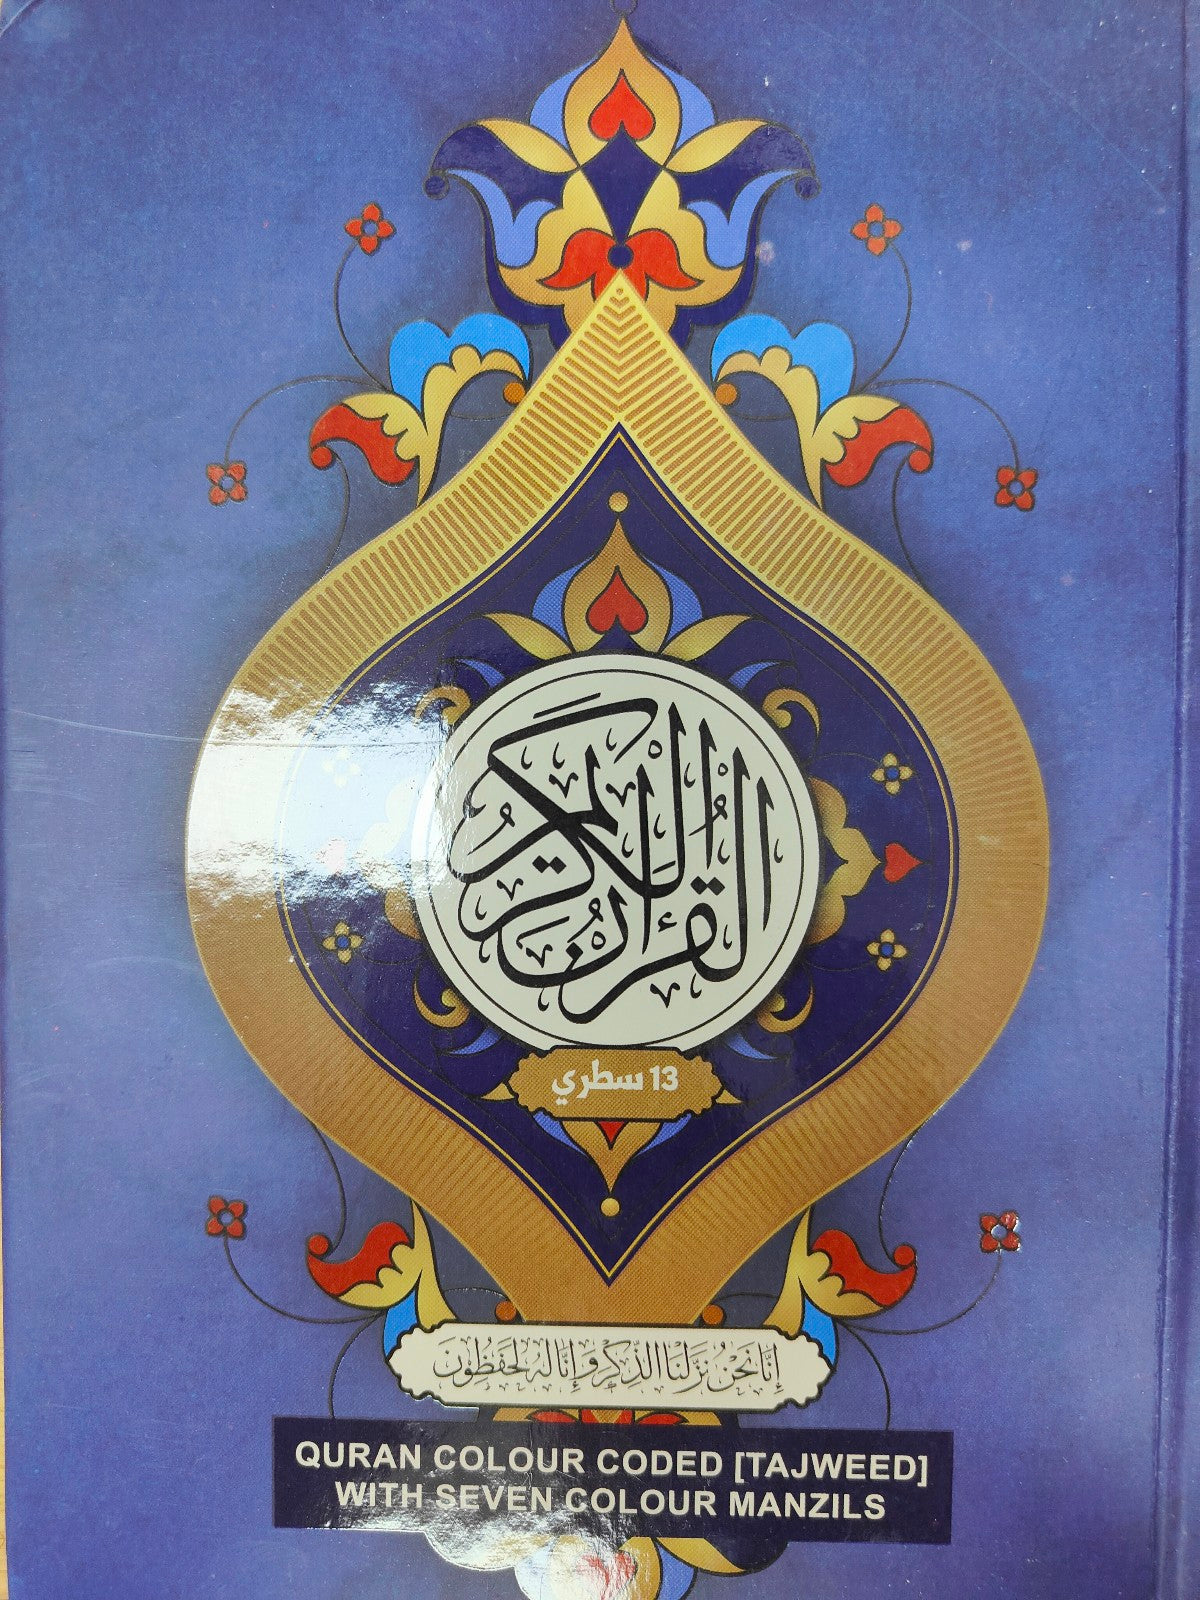 Discover the Colour-Coded Quran at Hikmah Boutique. With distinct color-coded for Tajweed rules, Big Size letters for easy reading, this Quran edition enhances your recitation, pronunciation, and understanding of Tajweed Inshallah. Elevate your Quranic journey today. 